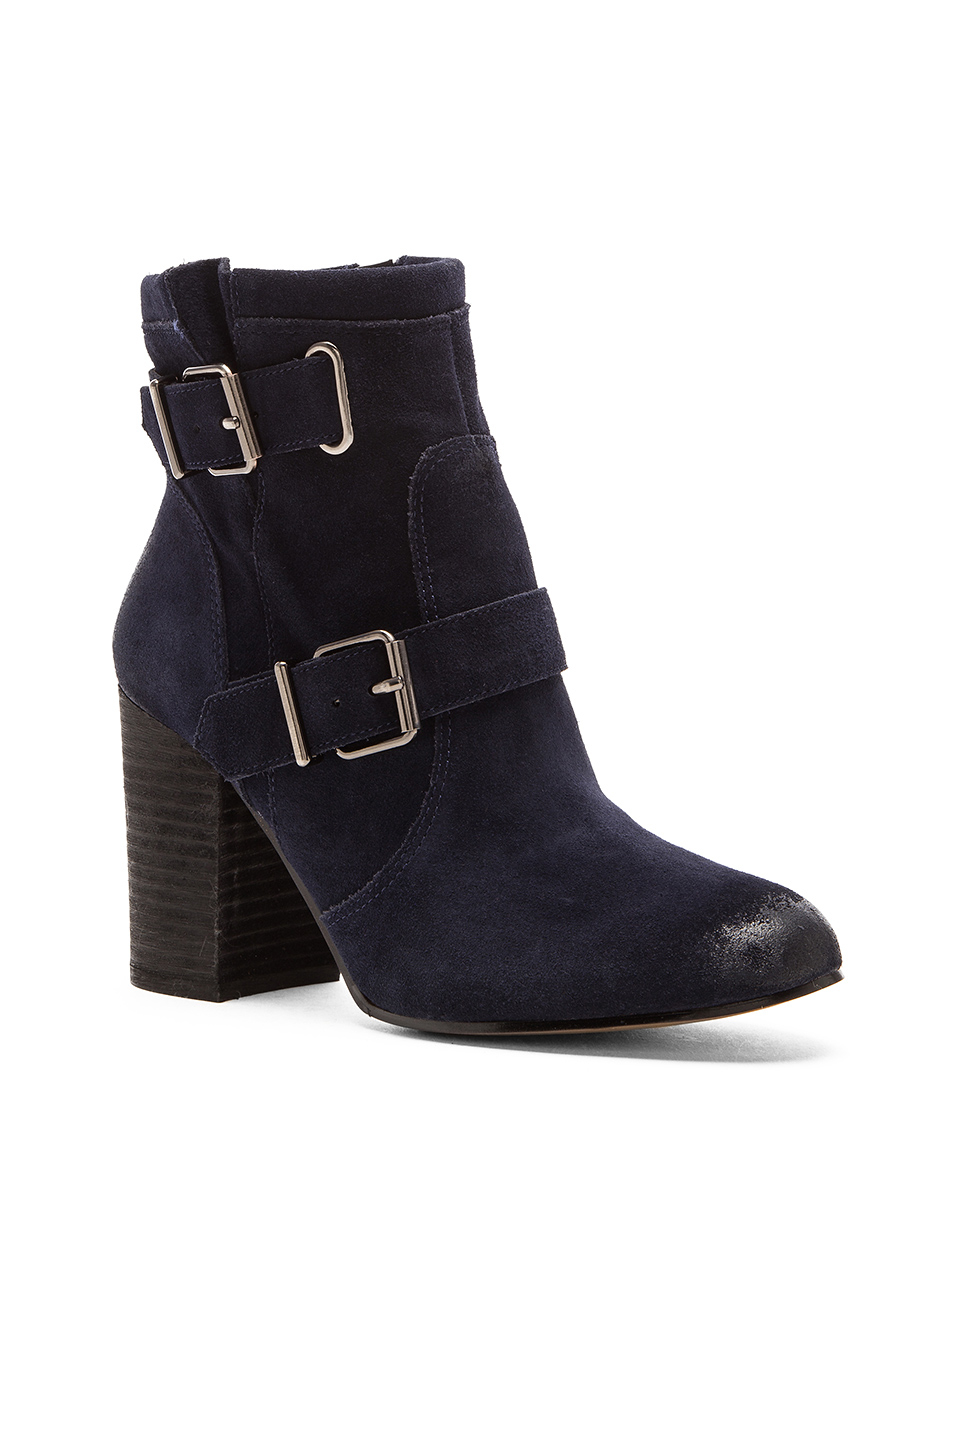 Lyst - Vince camuto Simlee Suede Boots in Black